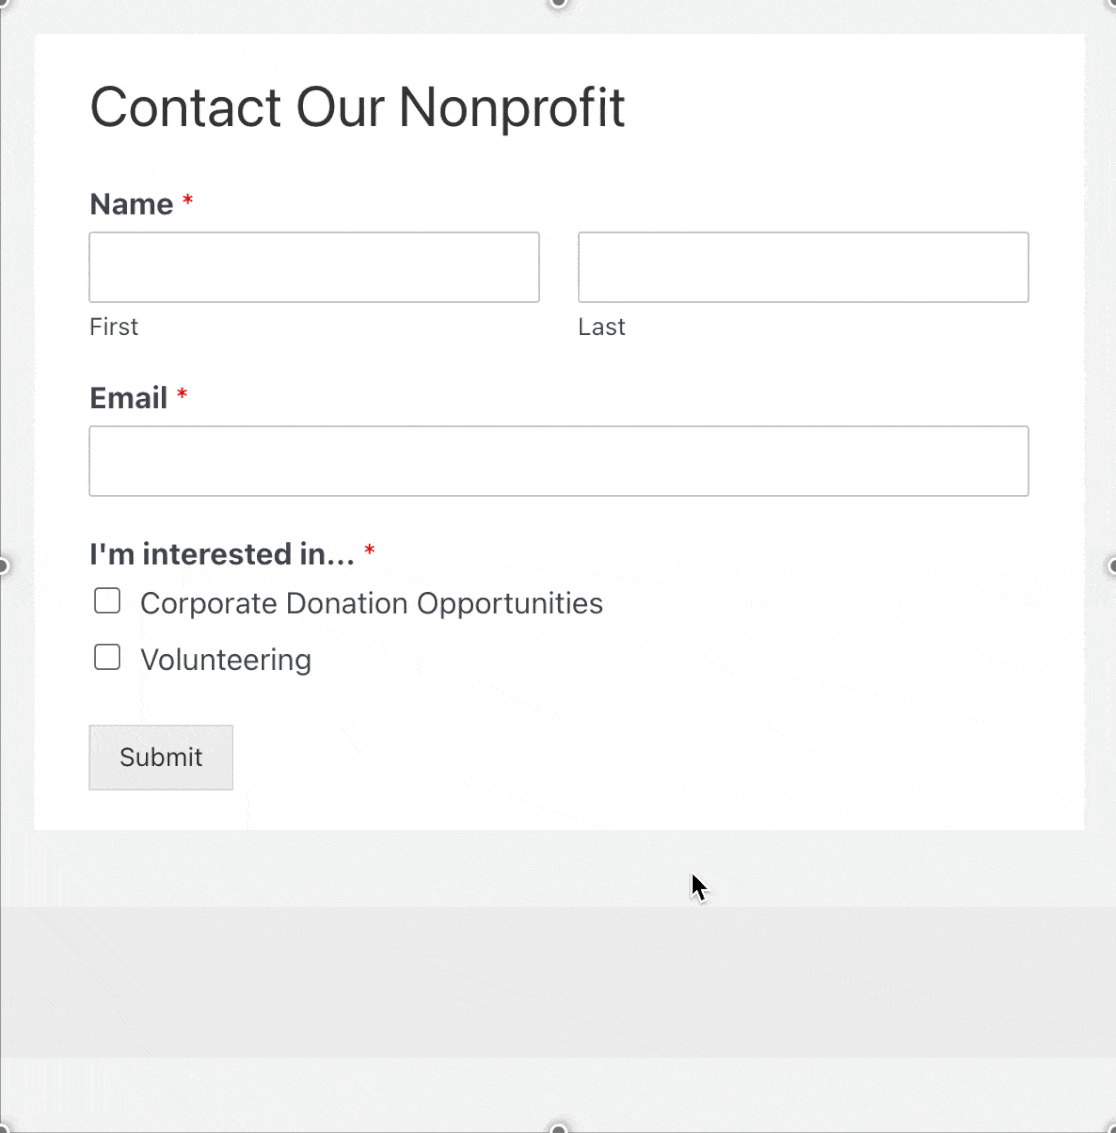 A nonprofit contact form with conditional logic